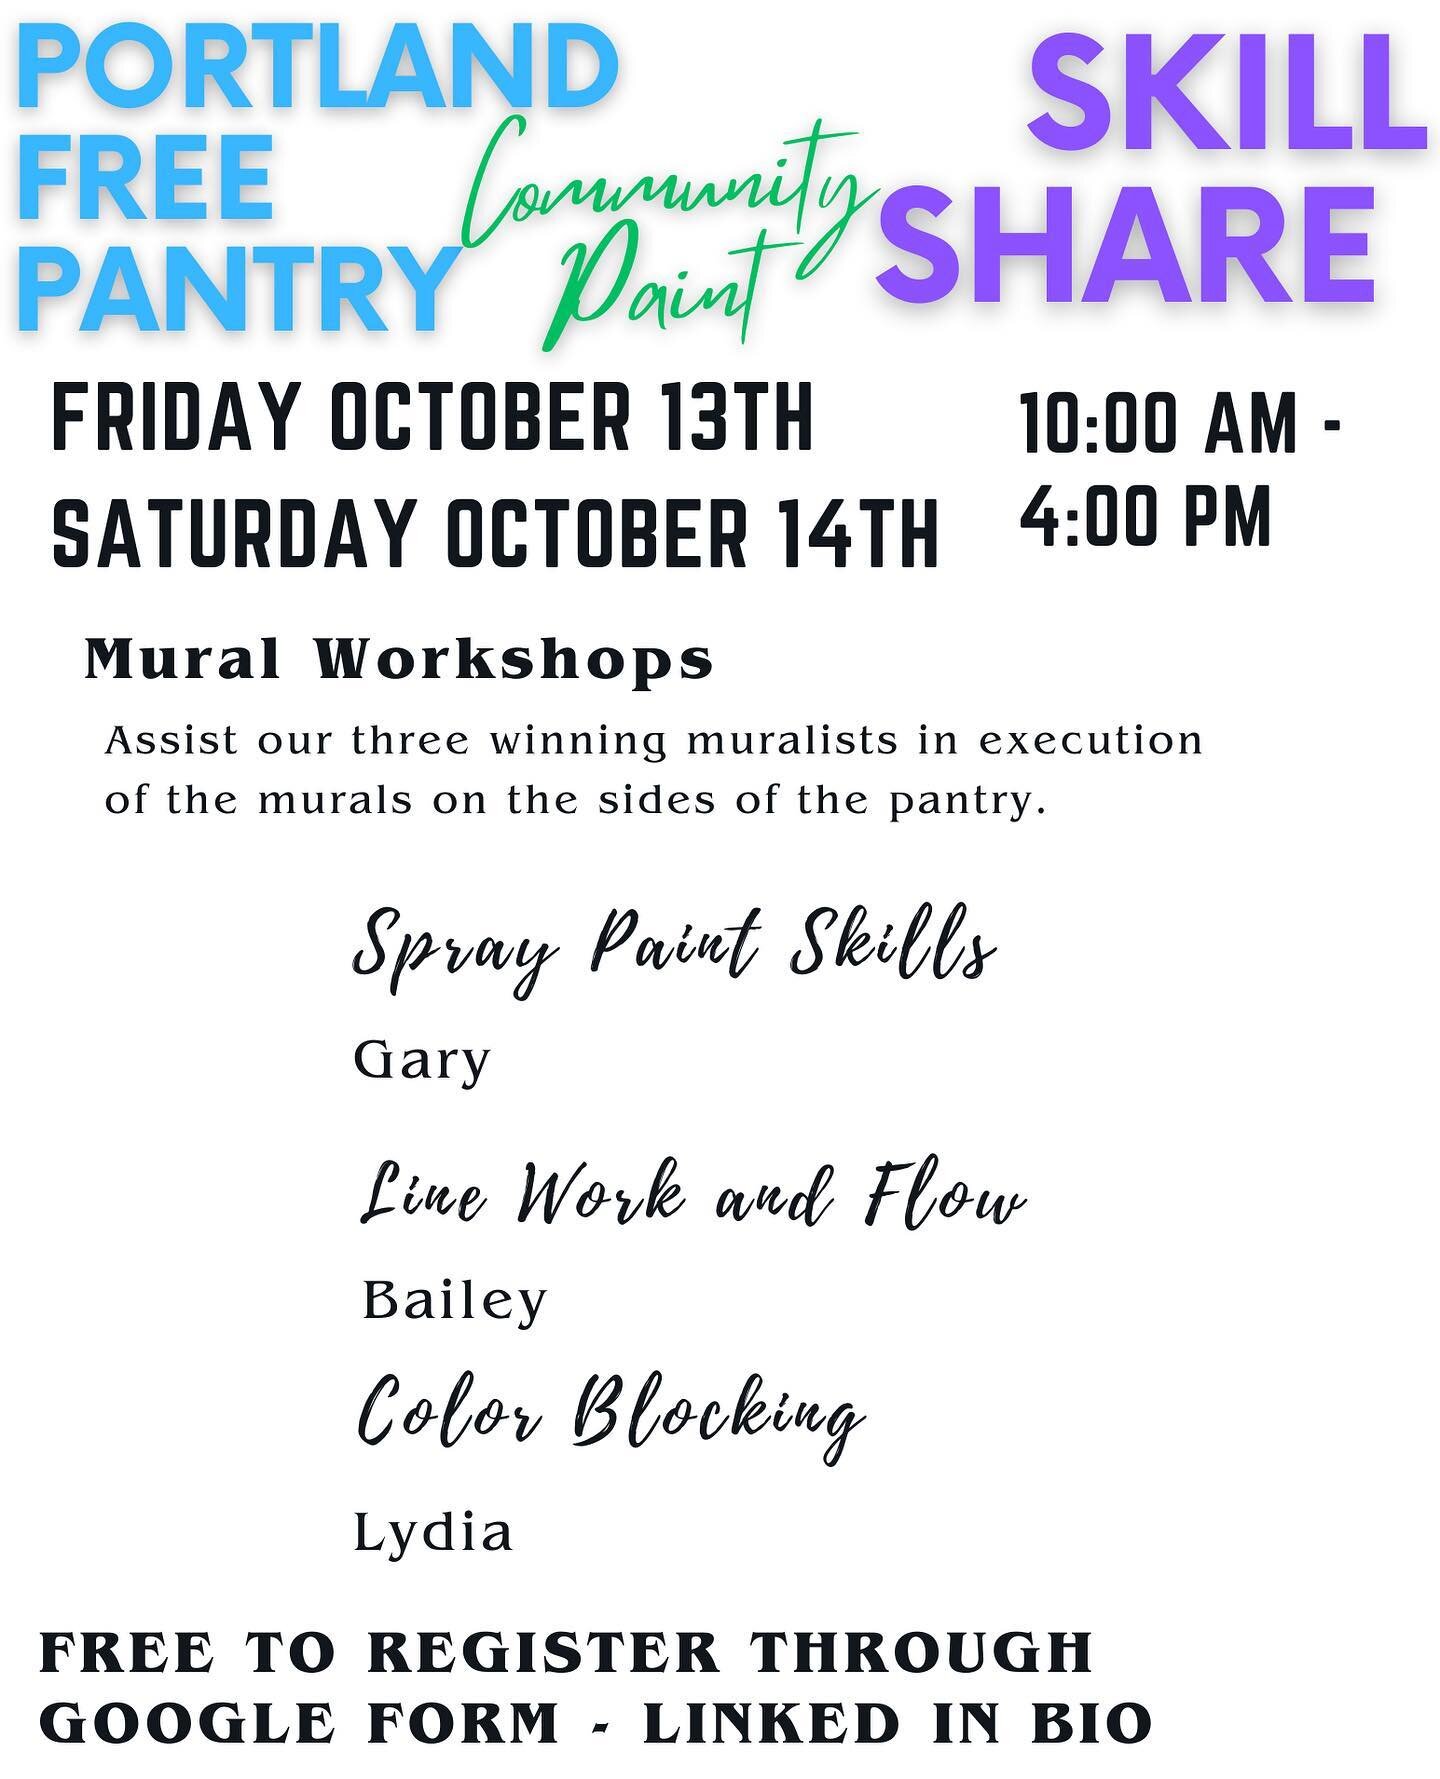 MURAL WORKSHOPS OCTOBER 13th and 14th. Paint away any bad luck from Friday the 13th, meet the winning muralists, and most importantly have a great time. We are so excited to host two upcoming community skill share workshops to execute our winning mur